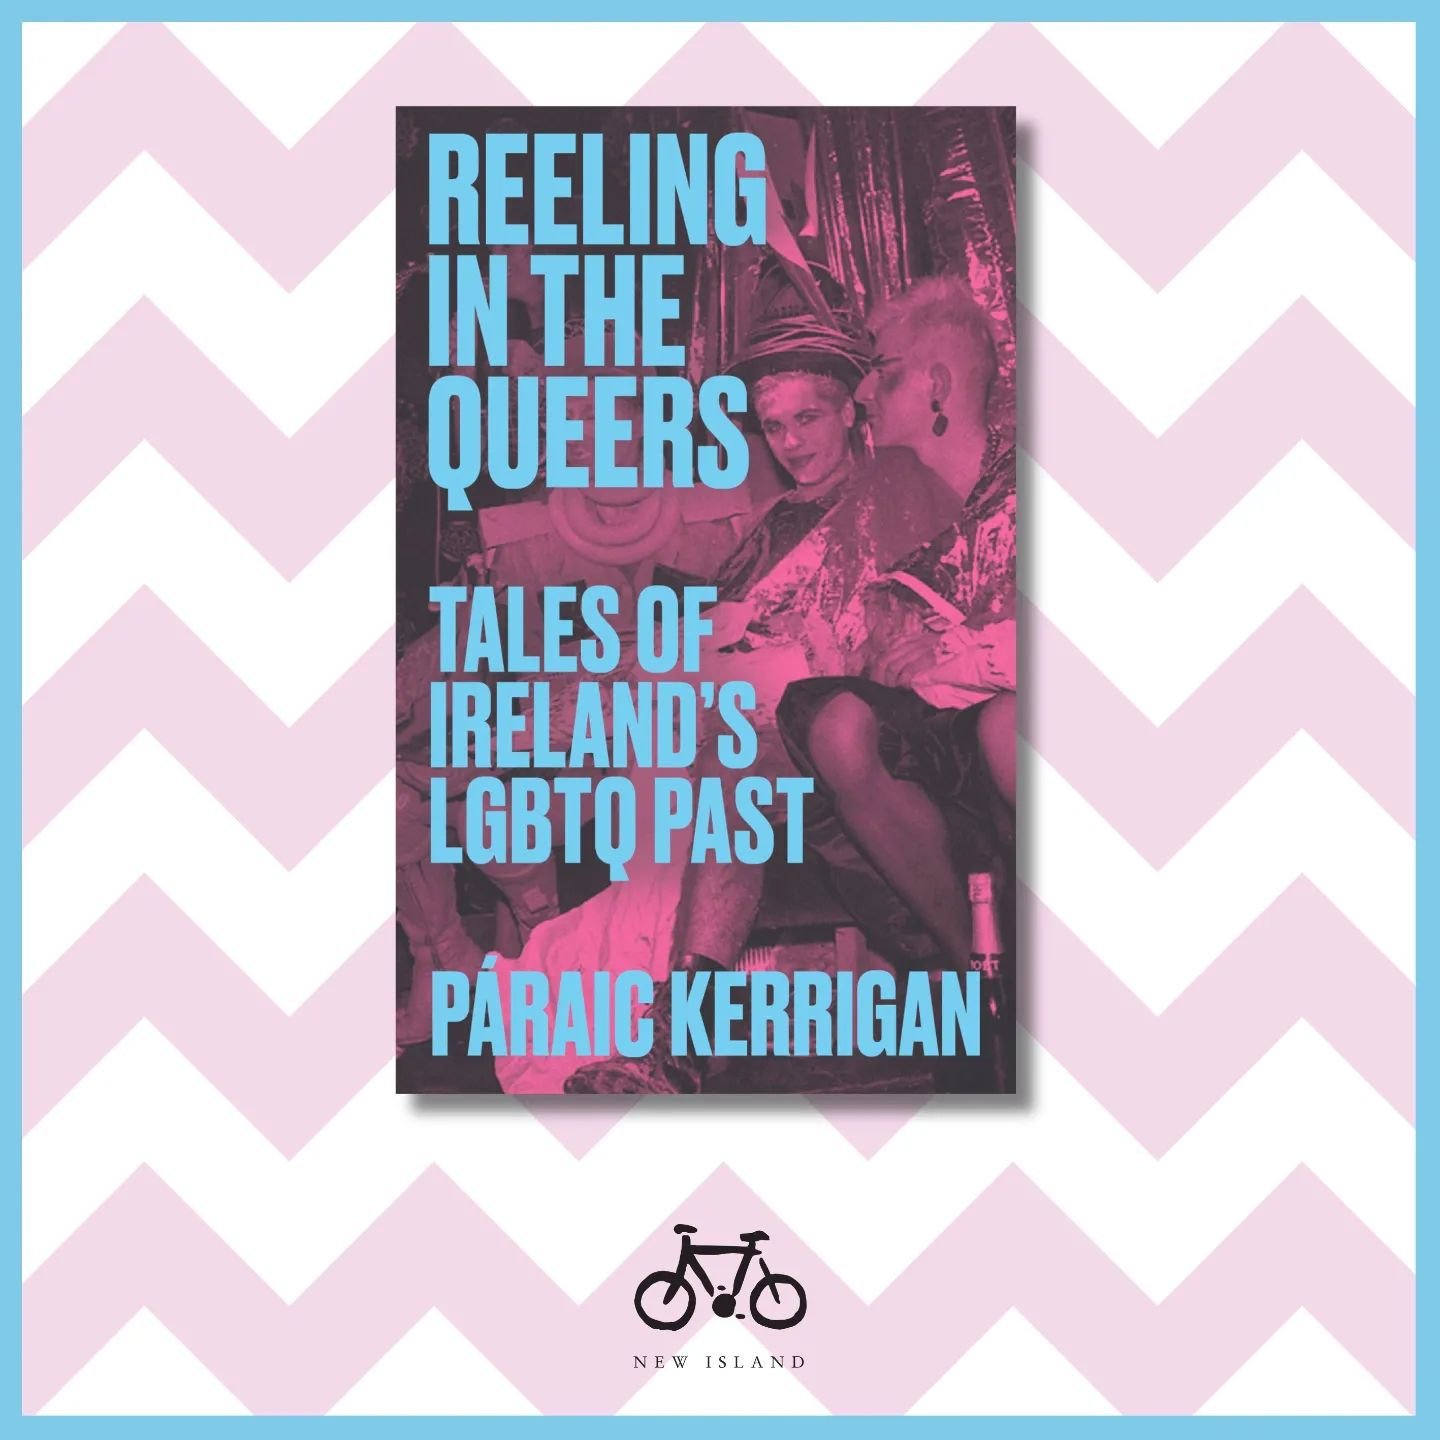 COVER REVEAL! PRE-ORDER OPEN! 🚀

We're delighted to reveal the cover for P&aacute;raic Kerrigan's REELING IN THE QUEERS: TALES OF IRELAND'S LGBTQ PAST, designed by Emer Brennan.&nbsp;Pre-order now from our friends at Dubray. Link in bio!&nbsp; Out J